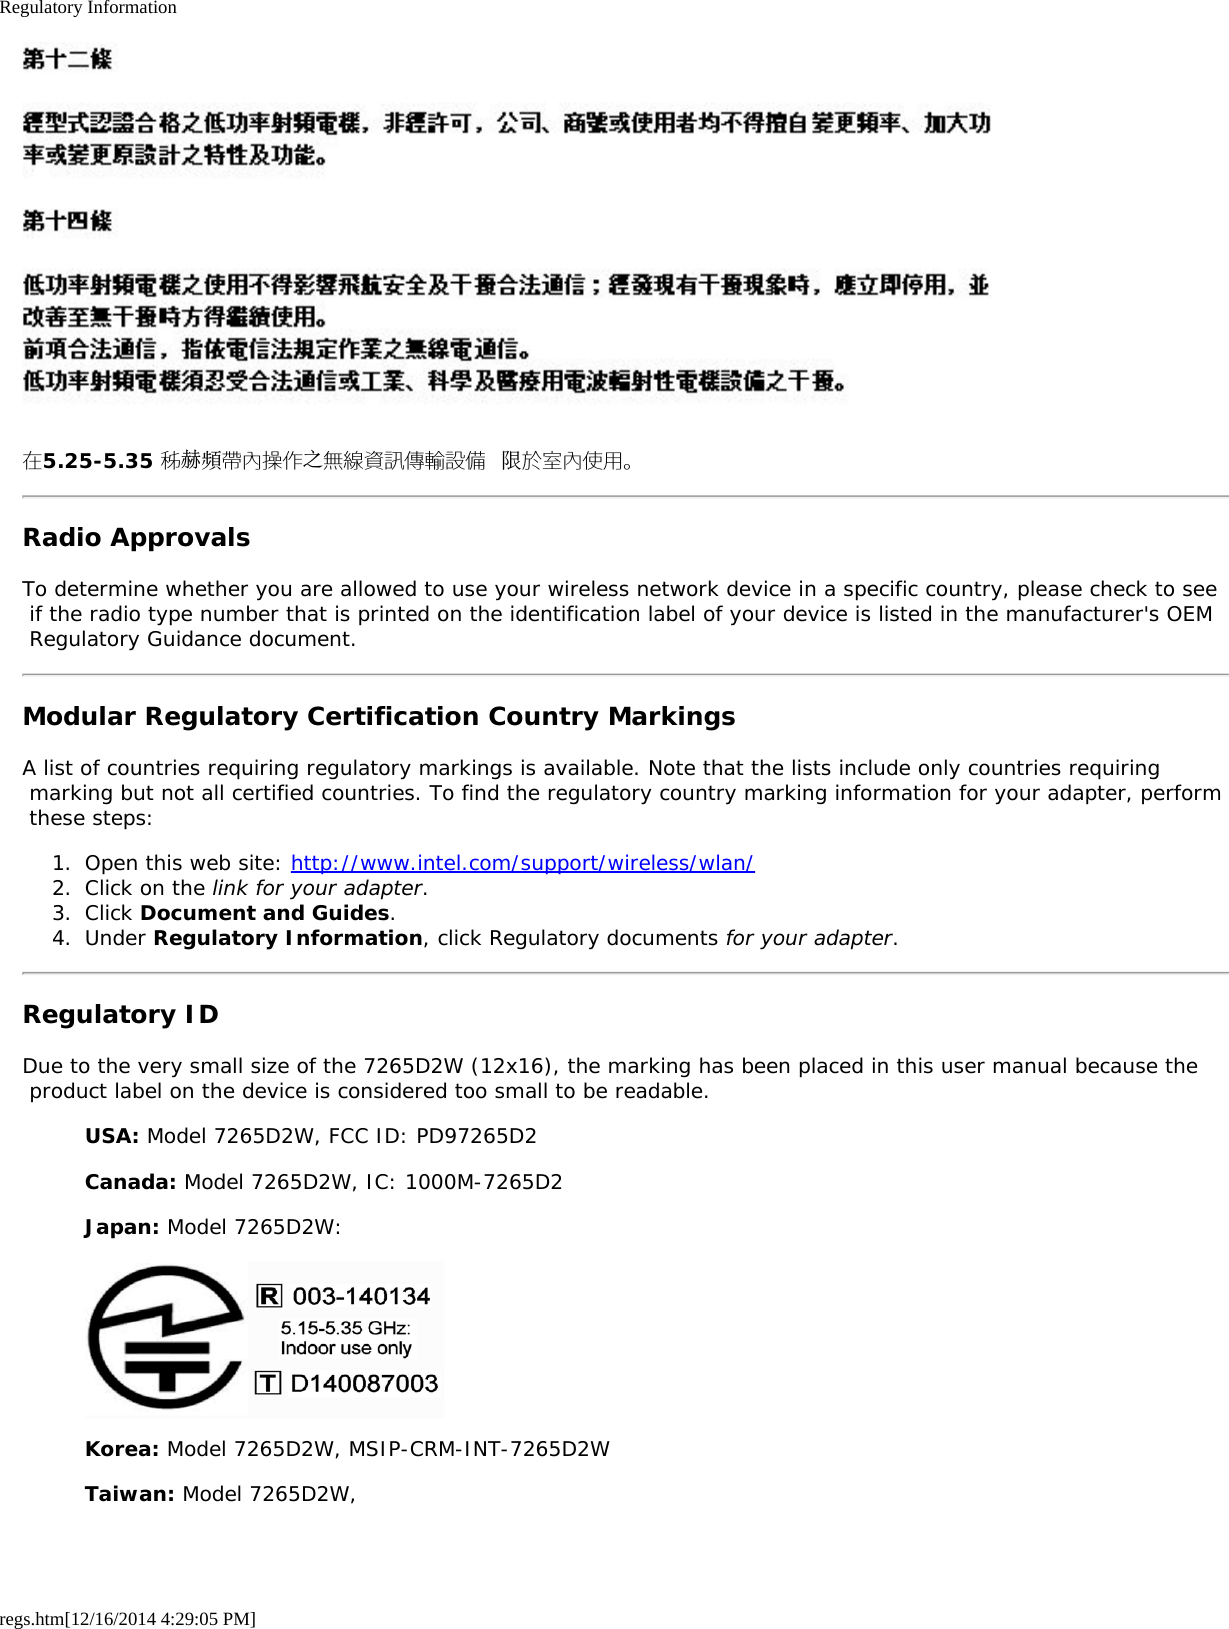 Regulatory Informationregs.htm[12/16/2014 4:29:05 PM]在5.25-5.35 秭赫頻帶內操作之無線資訊傳輸設備 限於室內使用。Radio ApprovalsTo determine whether you are allowed to use your wireless network device in a specific country, please check to see if the radio type number that is printed on the identification label of your device is listed in the manufacturer&apos;s OEM Regulatory Guidance document.Modular Regulatory Certification Country MarkingsA list of countries requiring regulatory markings is available. Note that the lists include only countries requiring marking but not all certified countries. To find the regulatory country marking information for your adapter, perform these steps:1.  Open this web site: http://www.intel.com/support/wireless/wlan/2.  Click on the link for your adapter.3.  Click Document and Guides.4.  Under Regulatory Information, click Regulatory documents for your adapter.Regulatory IDDue to the very small size of the 7265D2W (12x16), the marking has been placed in this user manual because the product label on the device is considered too small to be readable.USA: Model 7265D2W, FCC ID: PD97265D2Canada: Model 7265D2W, IC: 1000M-7265D2Japan: Model 7265D2W:Korea: Model 7265D2W, MSIP-CRM-INT-7265D2WTaiwan: Model 7265D2W,